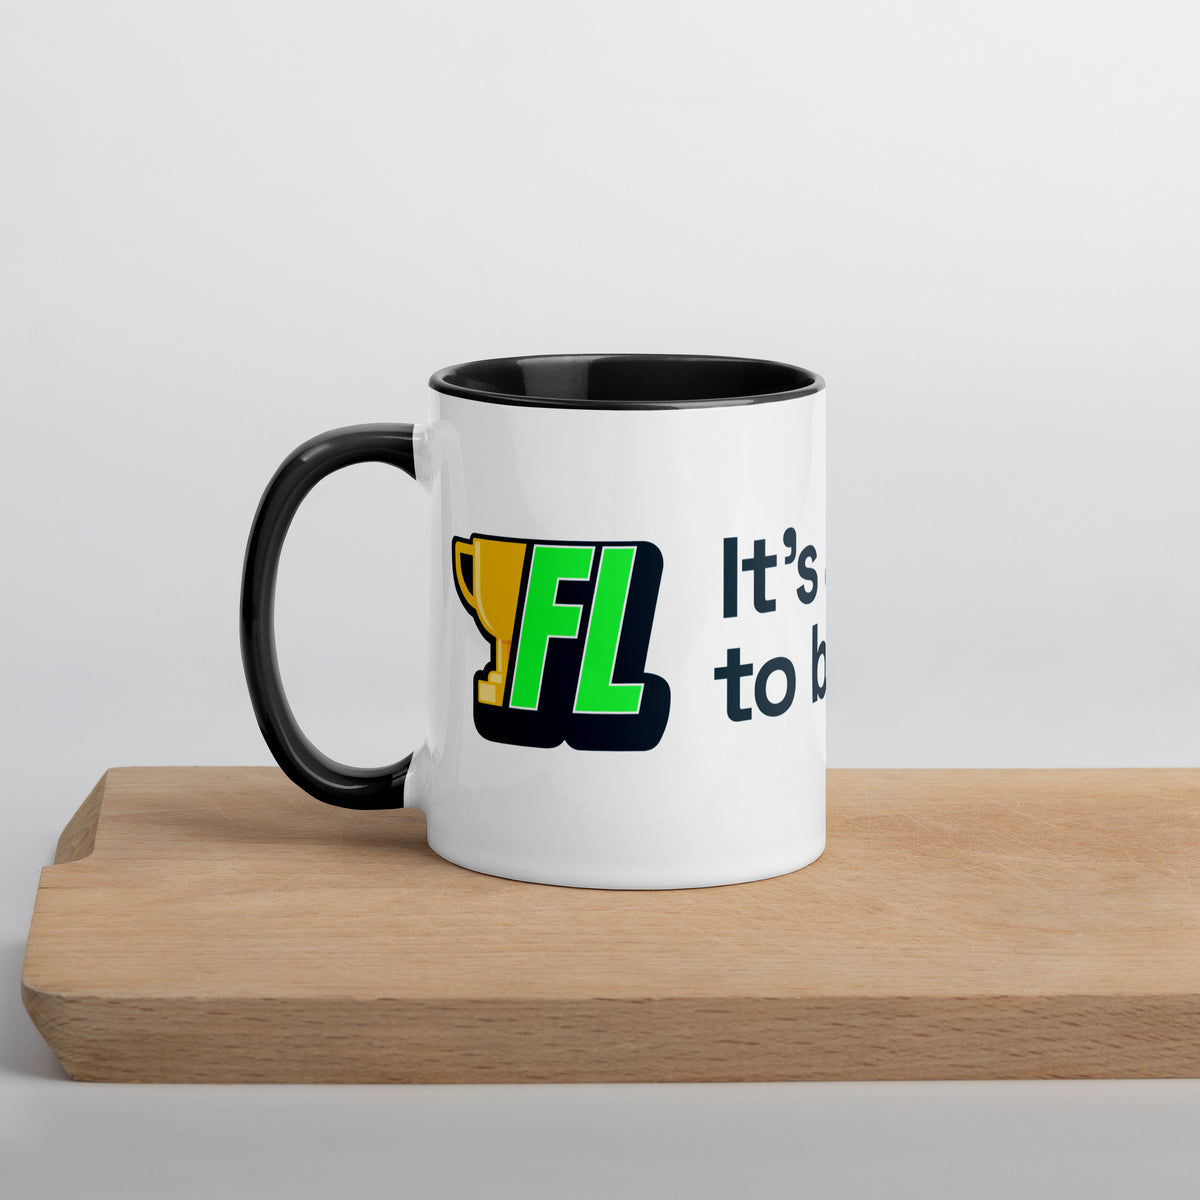 FL2024 "It's A Great Day To Be Great" Colored Mug